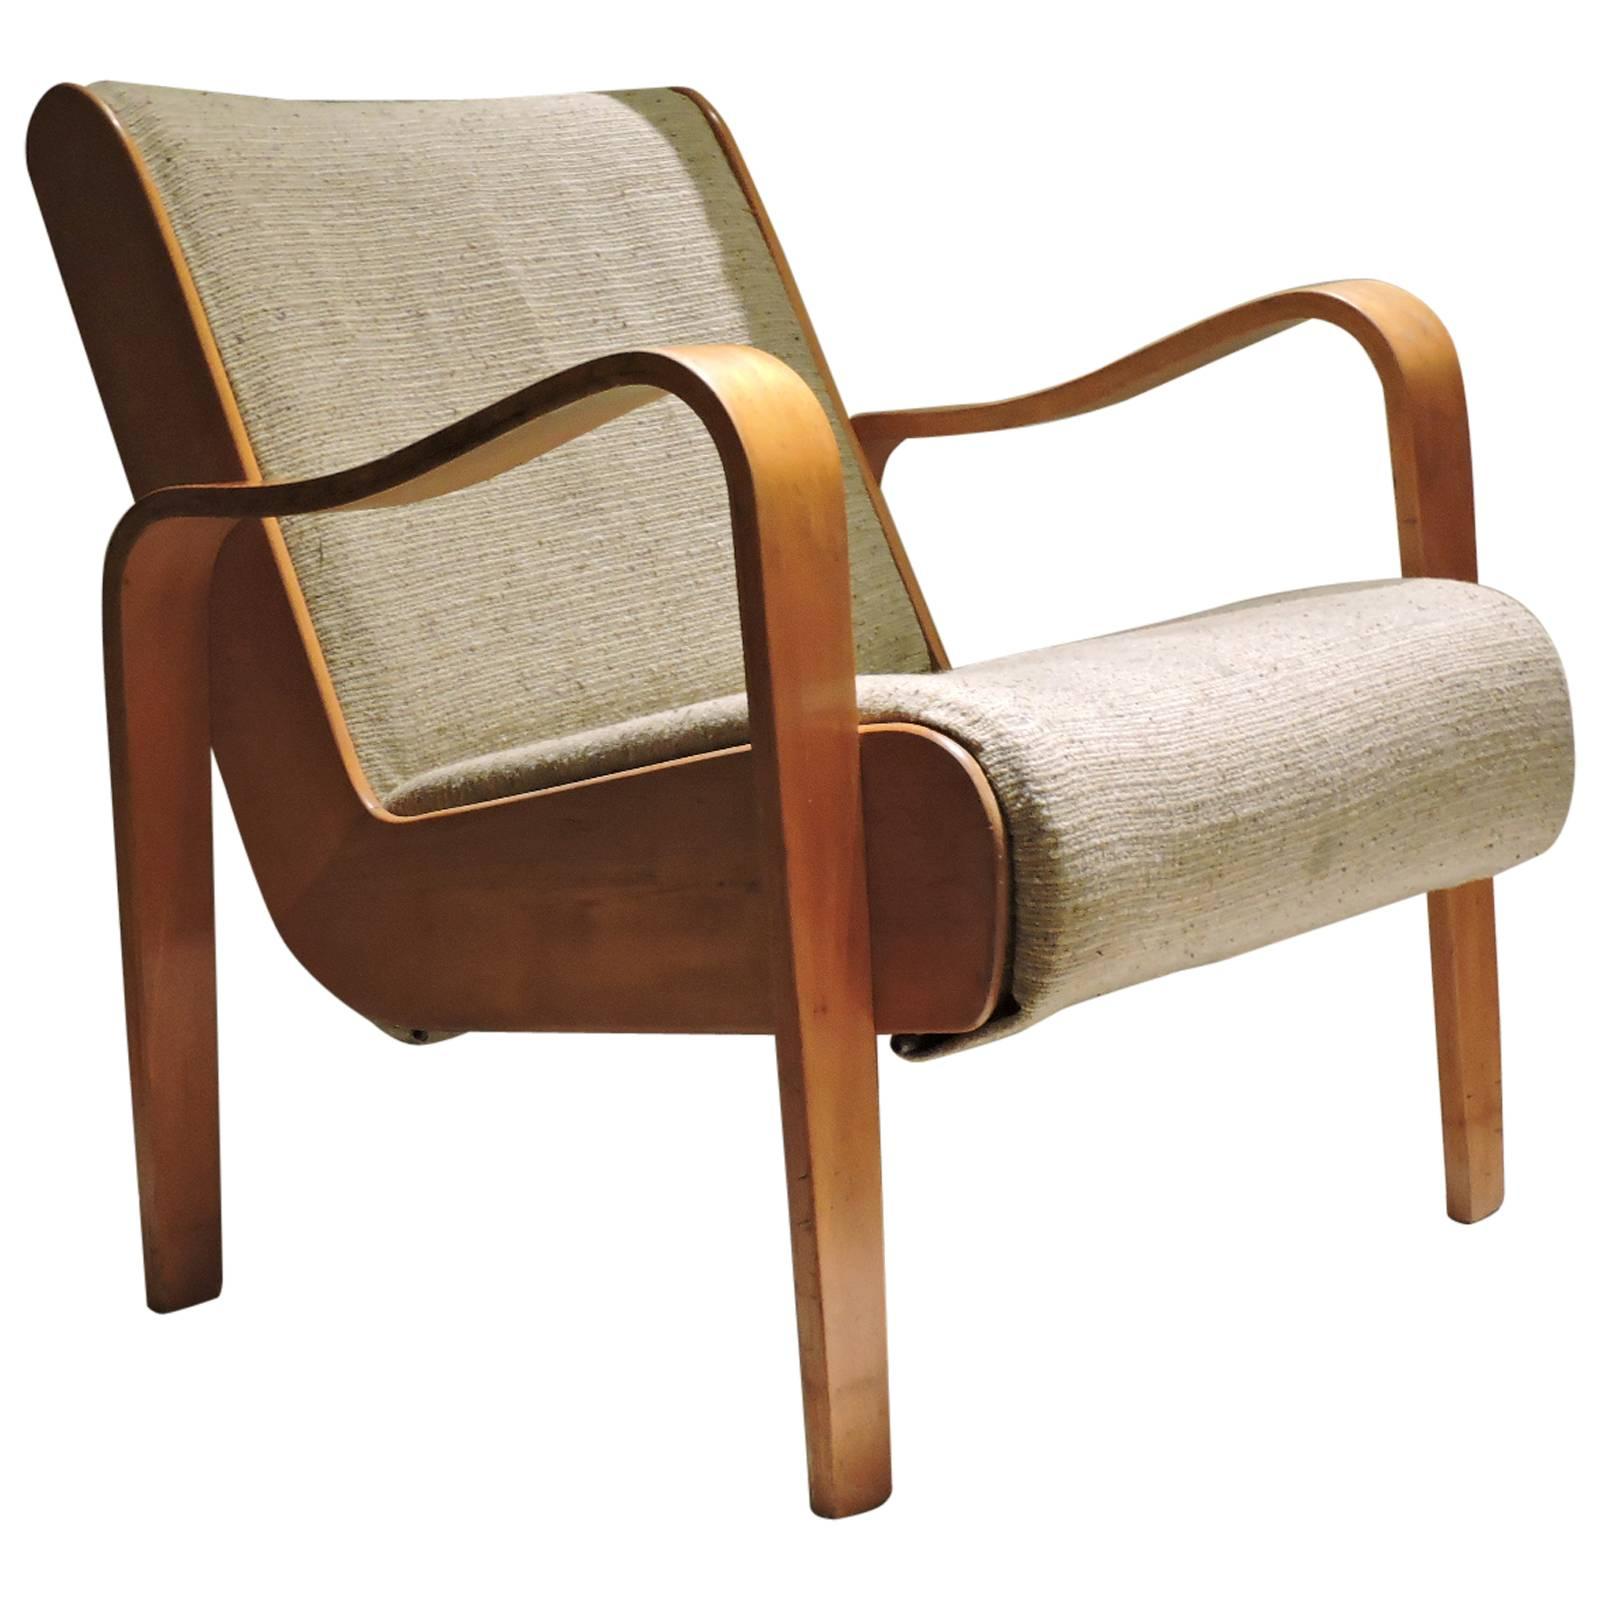  Unusual Thonet Bentwood Lounge Chair